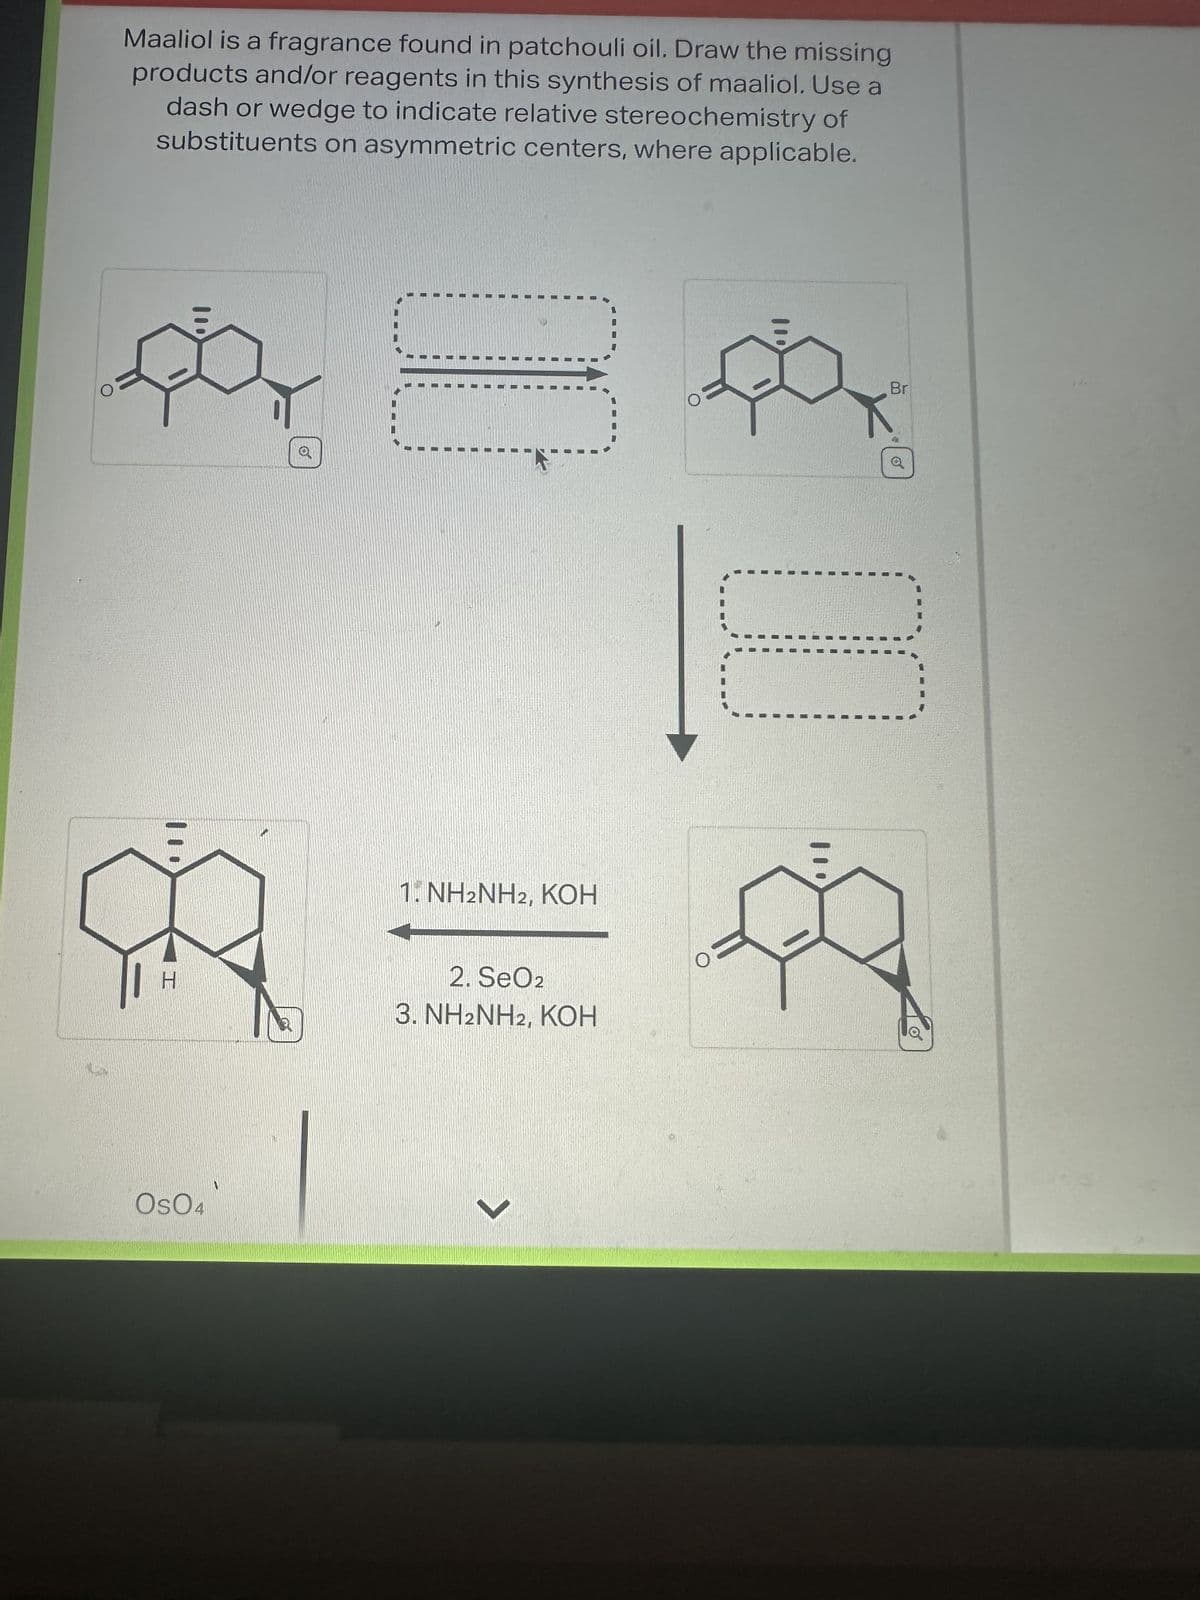 Maaliol is a fragrance found in patchouli oil. Draw the missing
products and/or reagents in this synthesis of maaliol. Use a
dash or wedge to indicate relative stereochemistry of
substituents on asymmetric centers, where applicable.
pa
M
H
Os04
1. NH2NH2, KOH
2. SeO2
3. NH2NH2, KOH
7
Br
✔
o